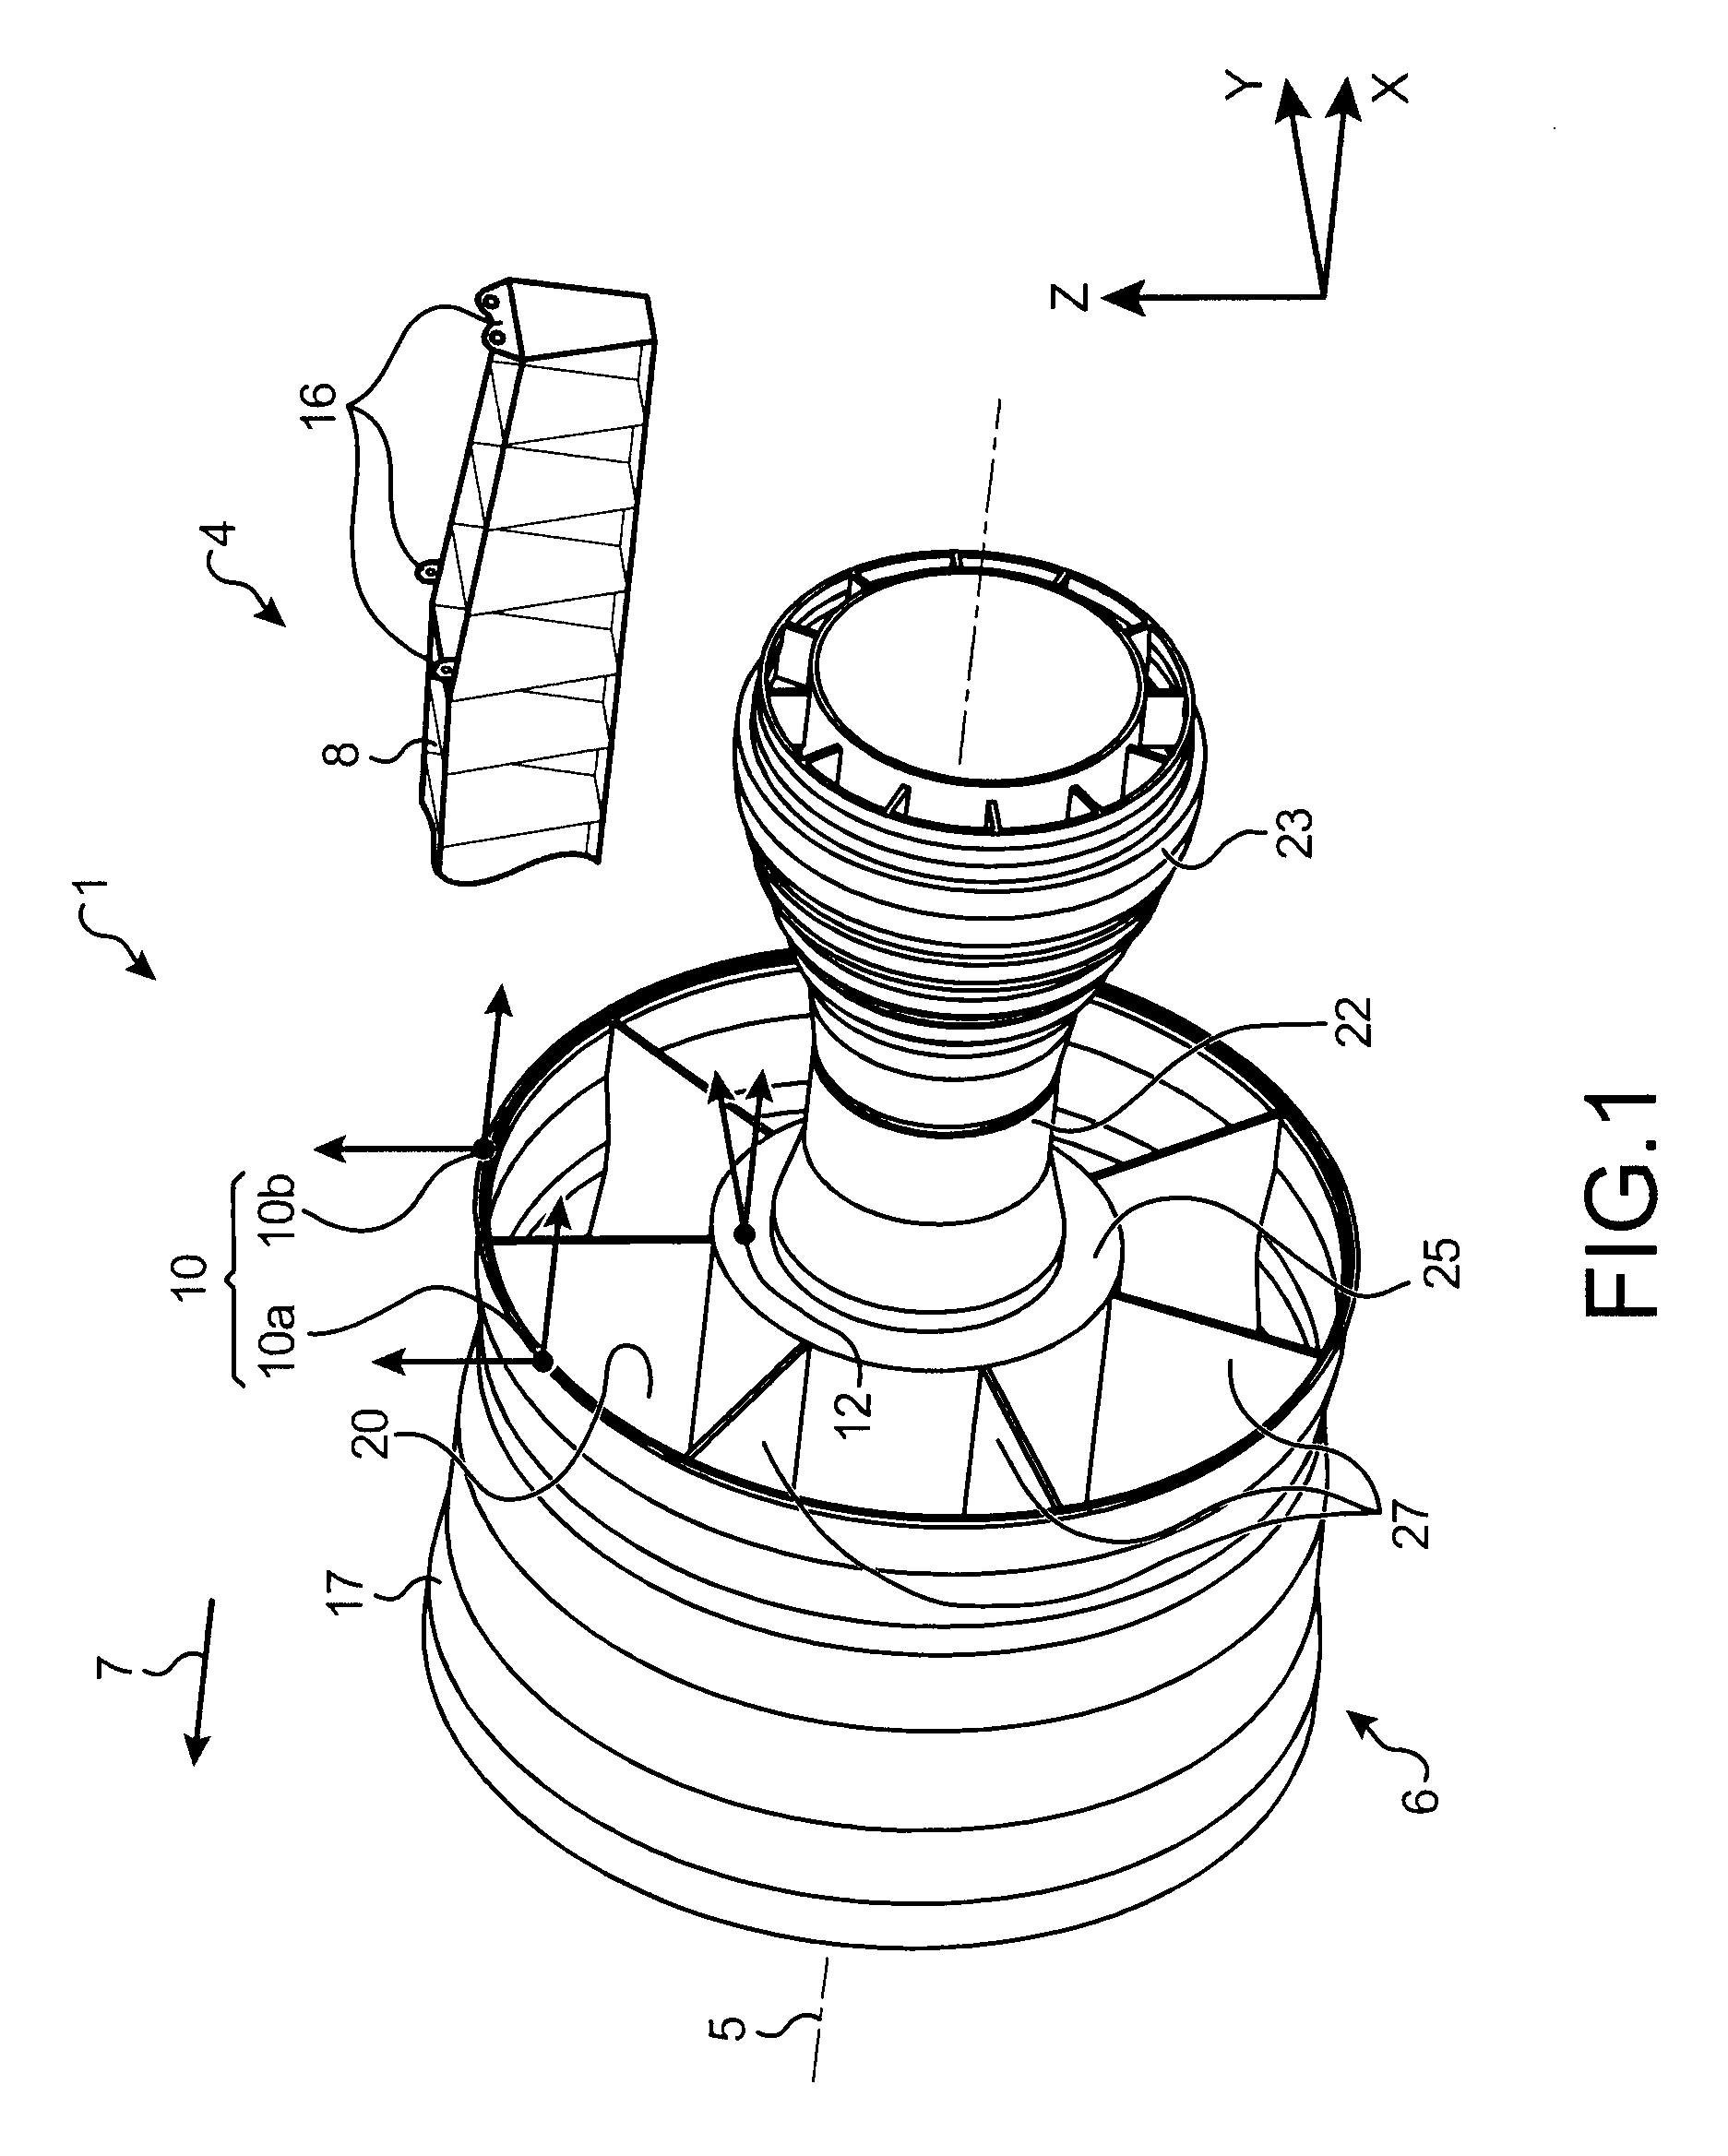 Engine assembly for aircraft comprising an engine as well as a device for locking said engine